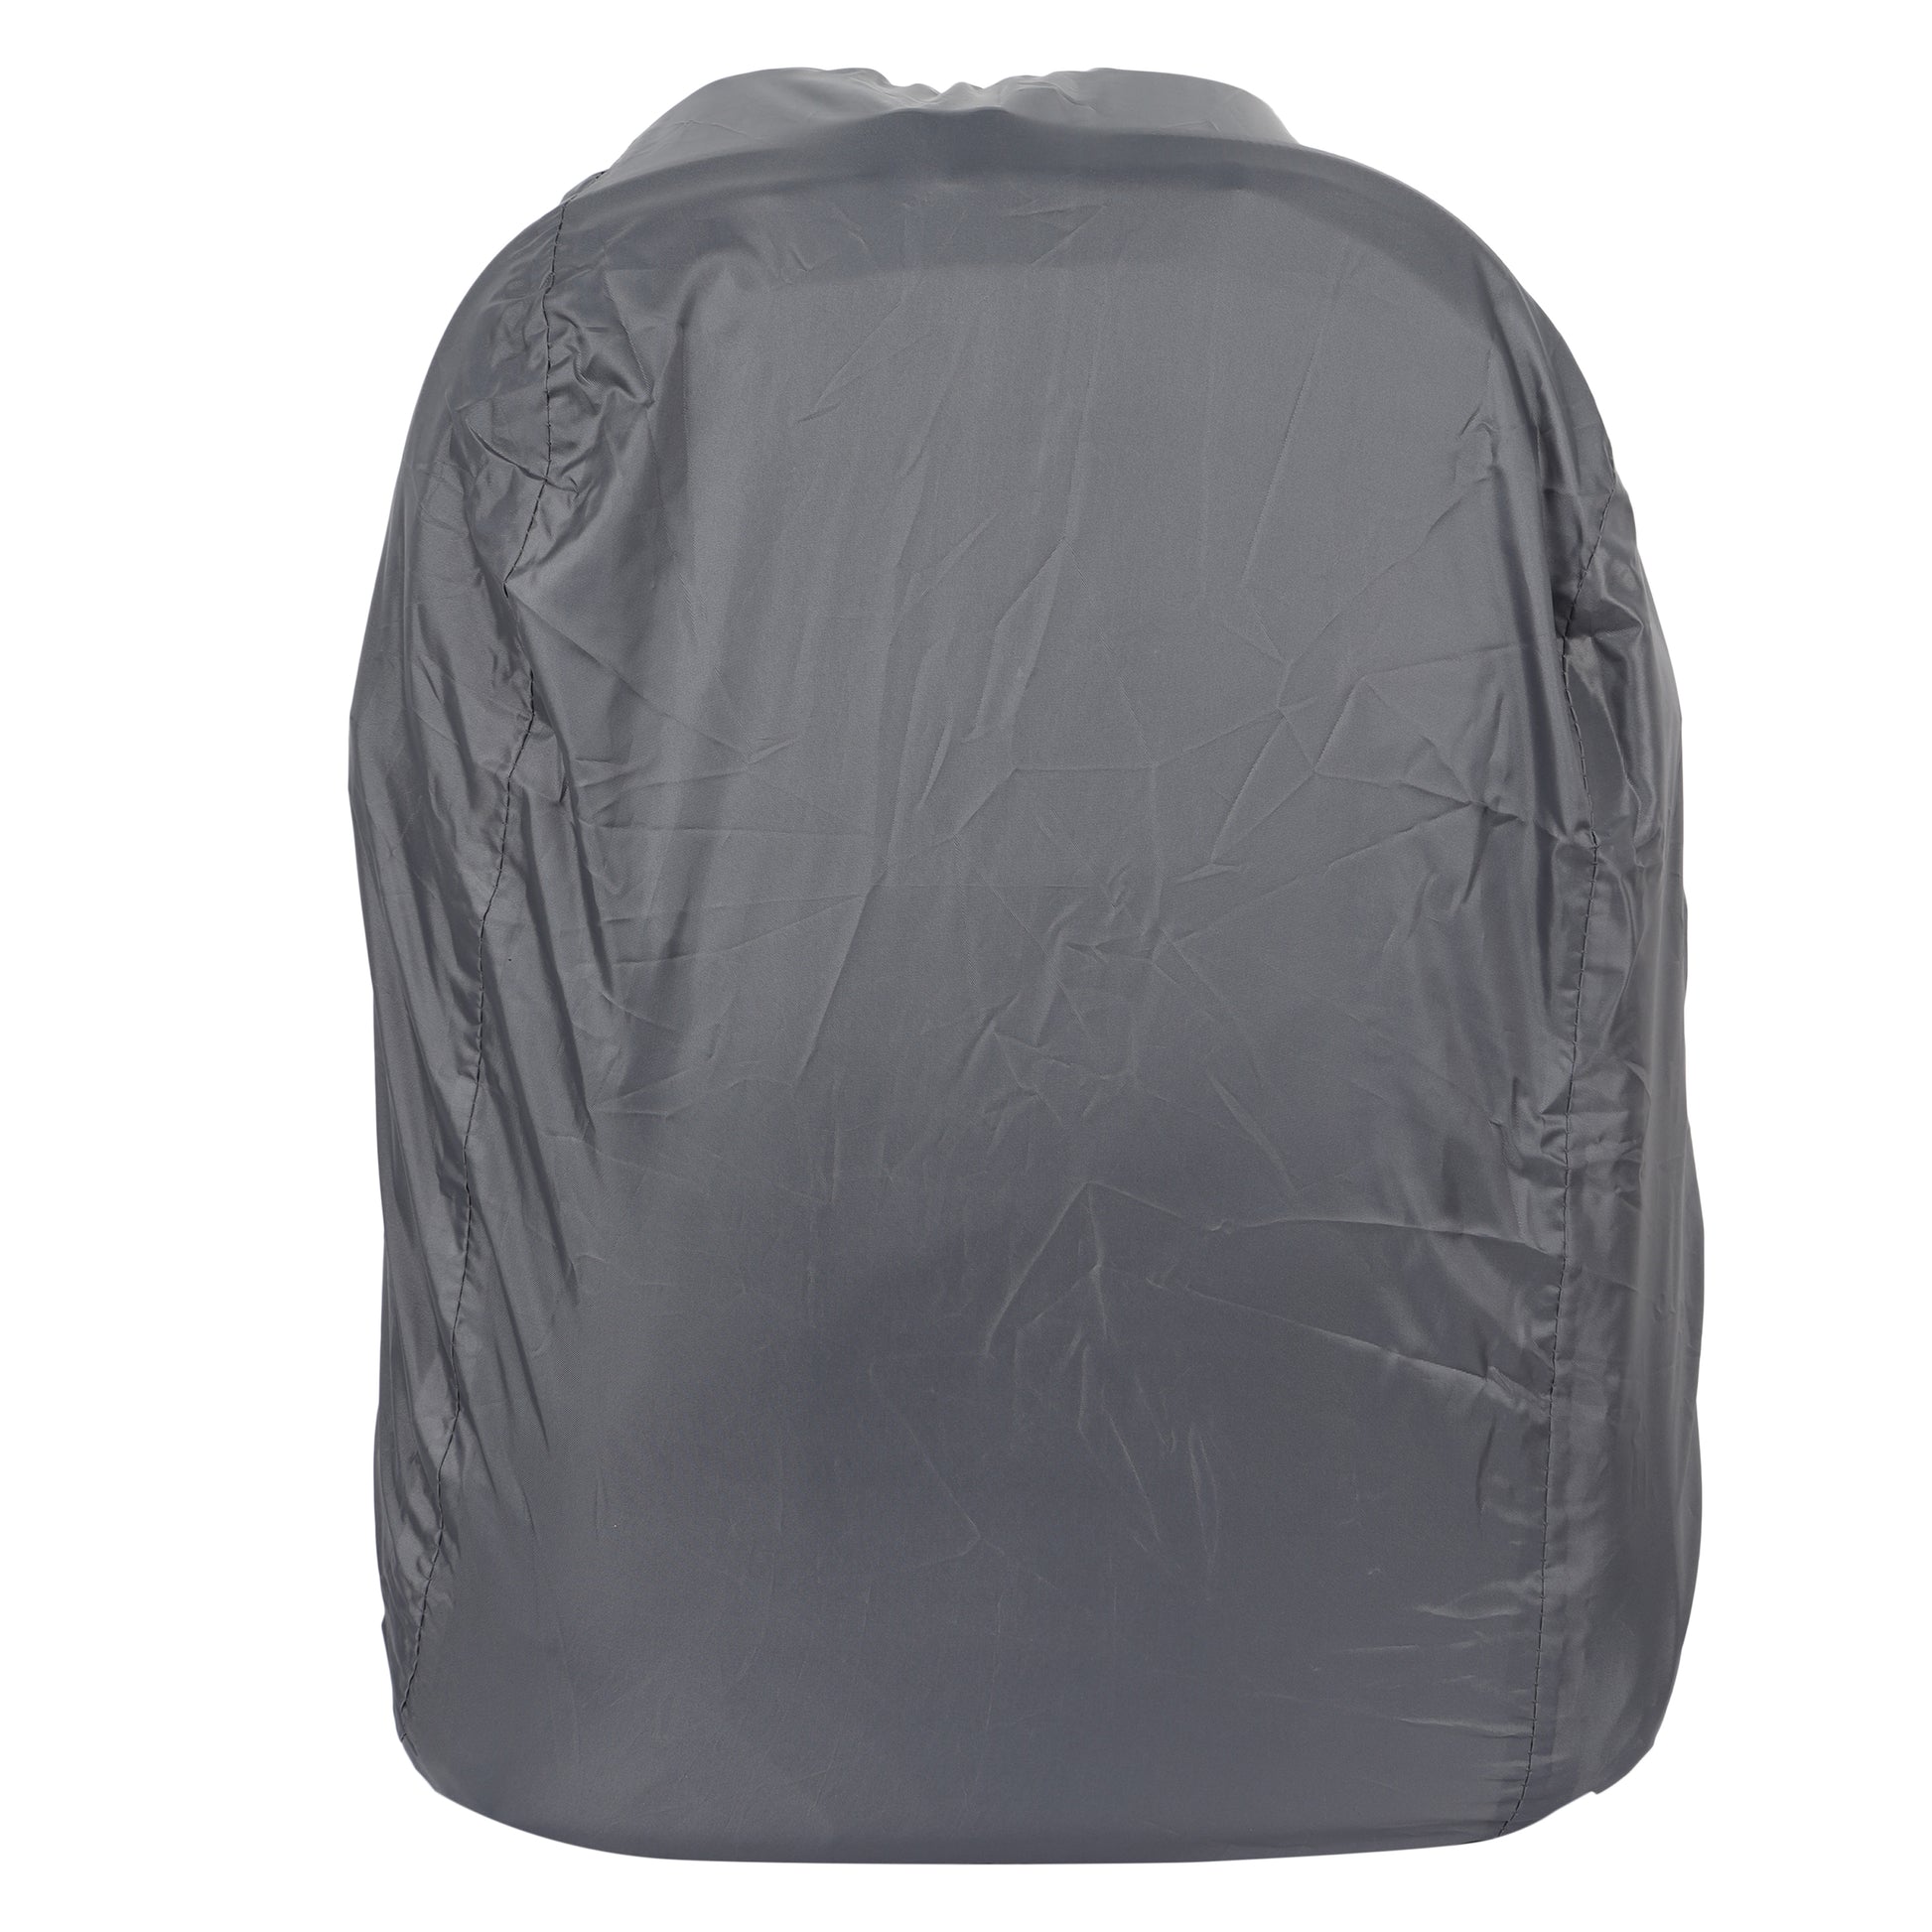 Image: Front view of the G15 Victory Pro DSLR camera bag, fully protected by the dedicated rain cover. The waterproof rain cover ensures complete coverage and reliable protection for your gear, allowing you to confidently shoot in challenging weather conditions while keeping your equipment safe and dry.